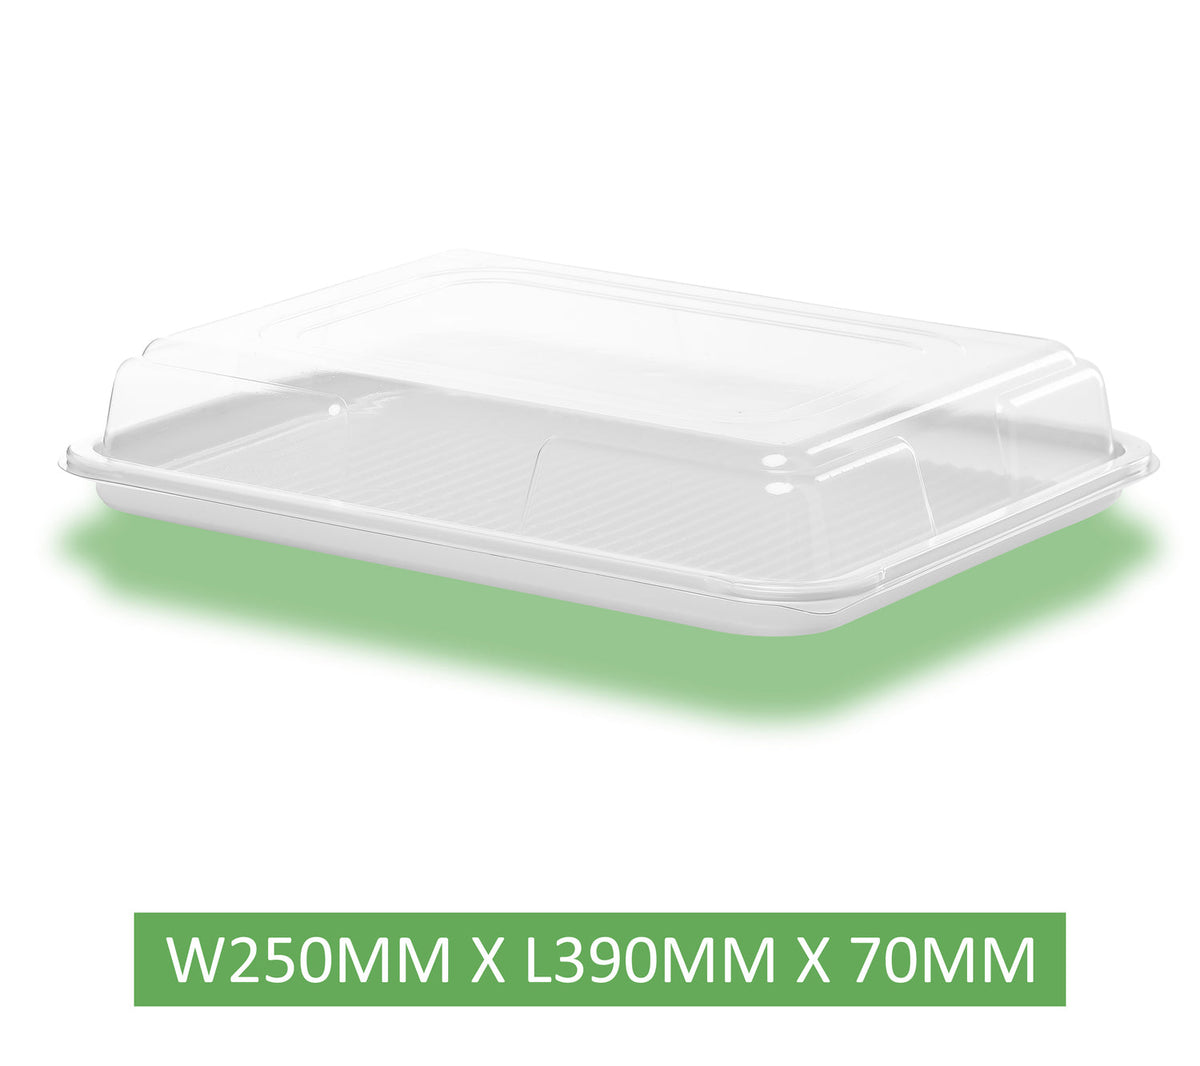 30 x Caterline Combi Clear Base Sandwich Platters with Lids (10 Large, 10 Medium, 10 Small)